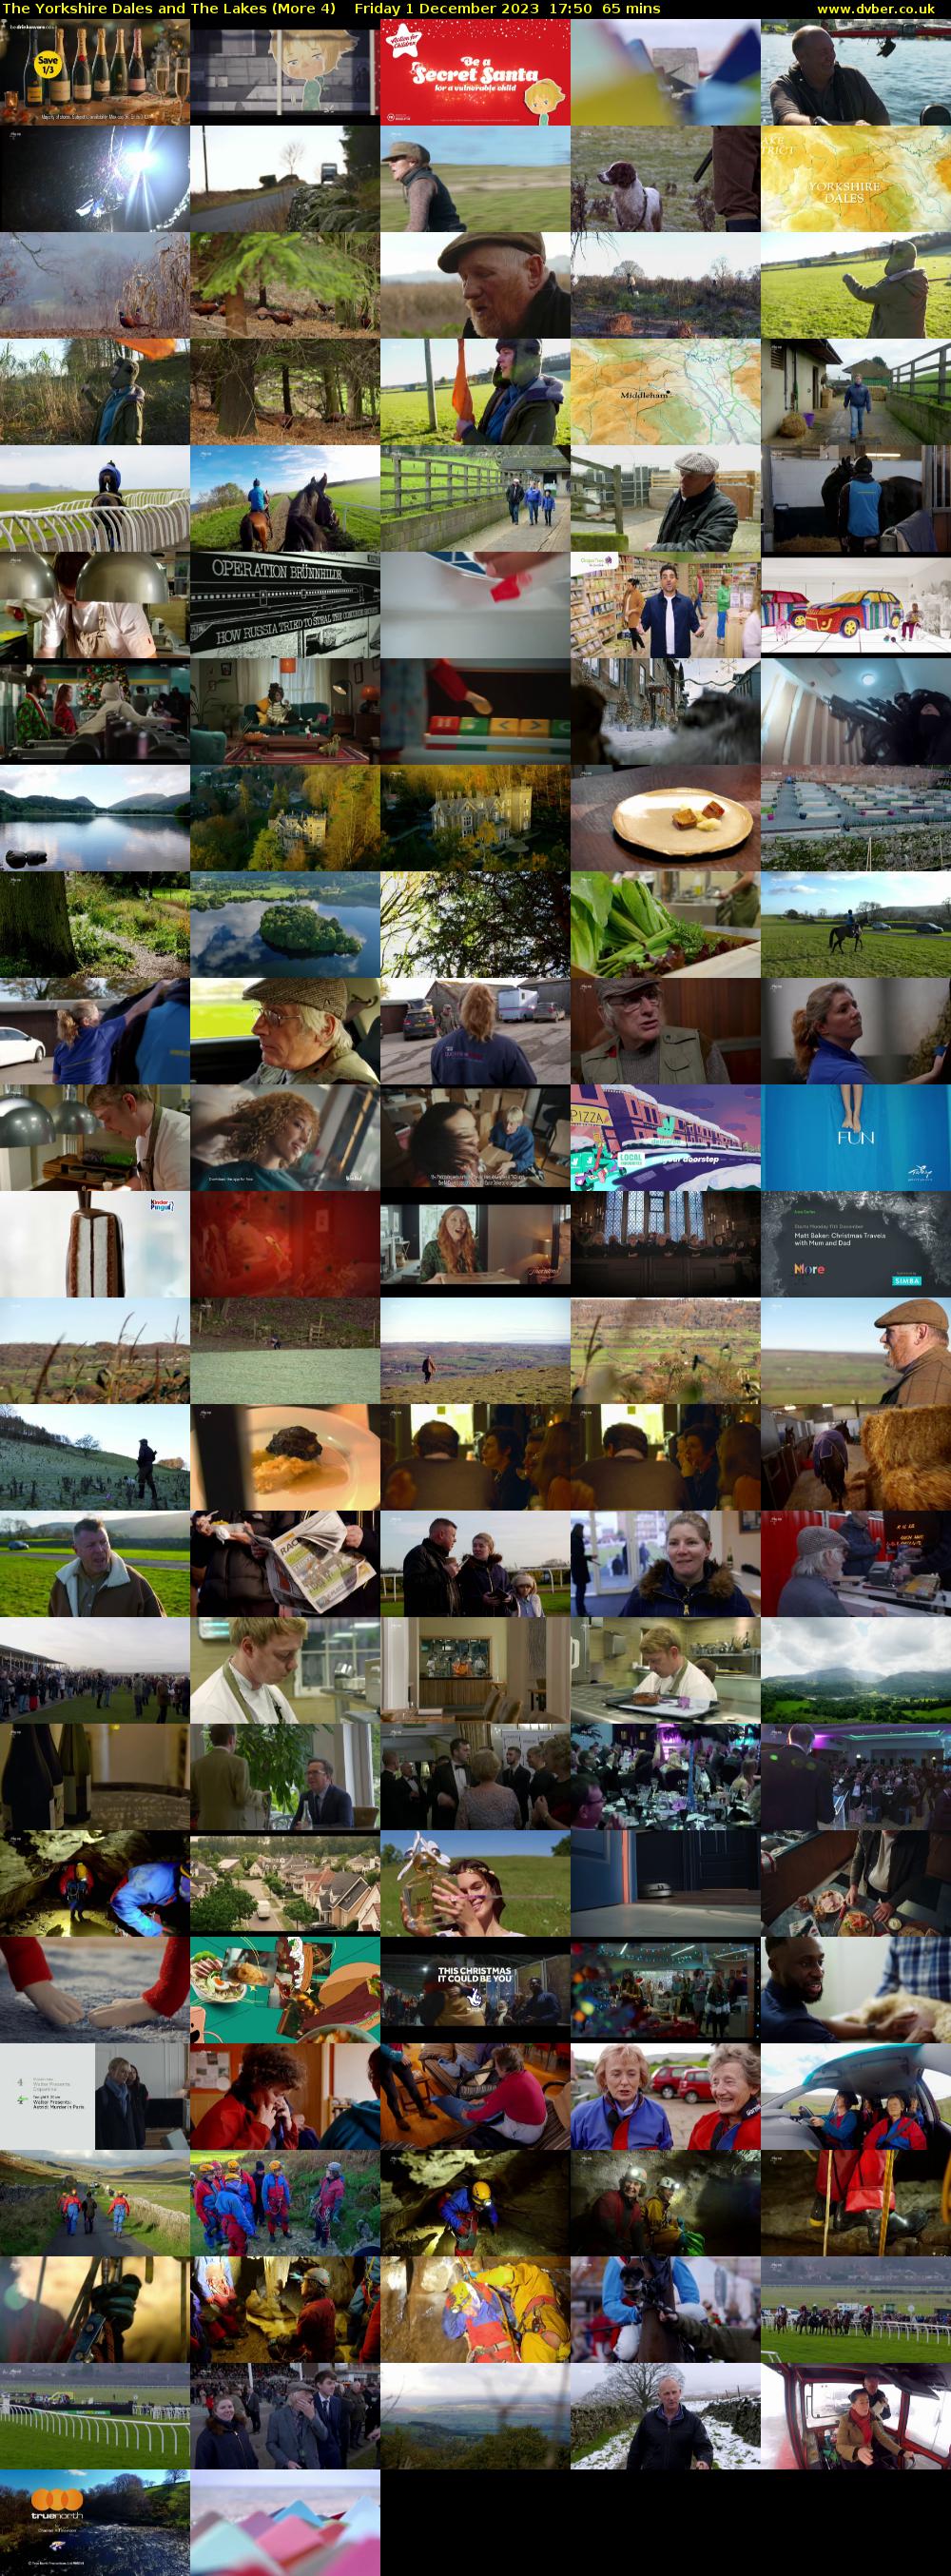 The Yorkshire Dales and The Lakes (More 4) Friday 1 December 2023 17:50 - 18:55